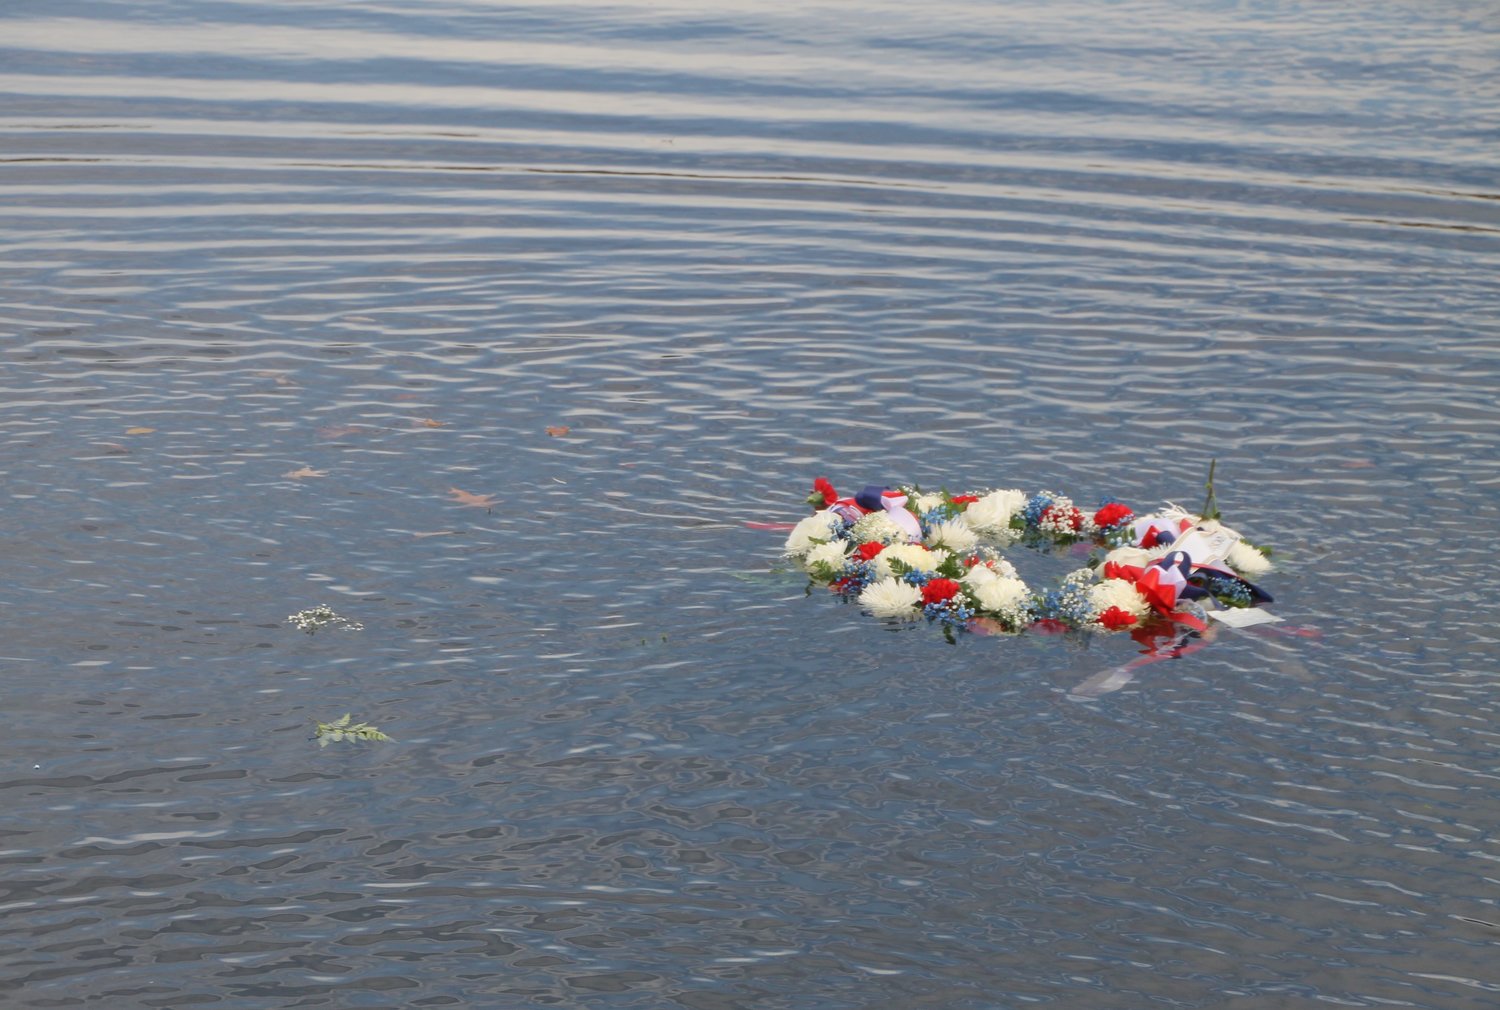 The Pearl Harbor memorial wreath floated in Mill River.